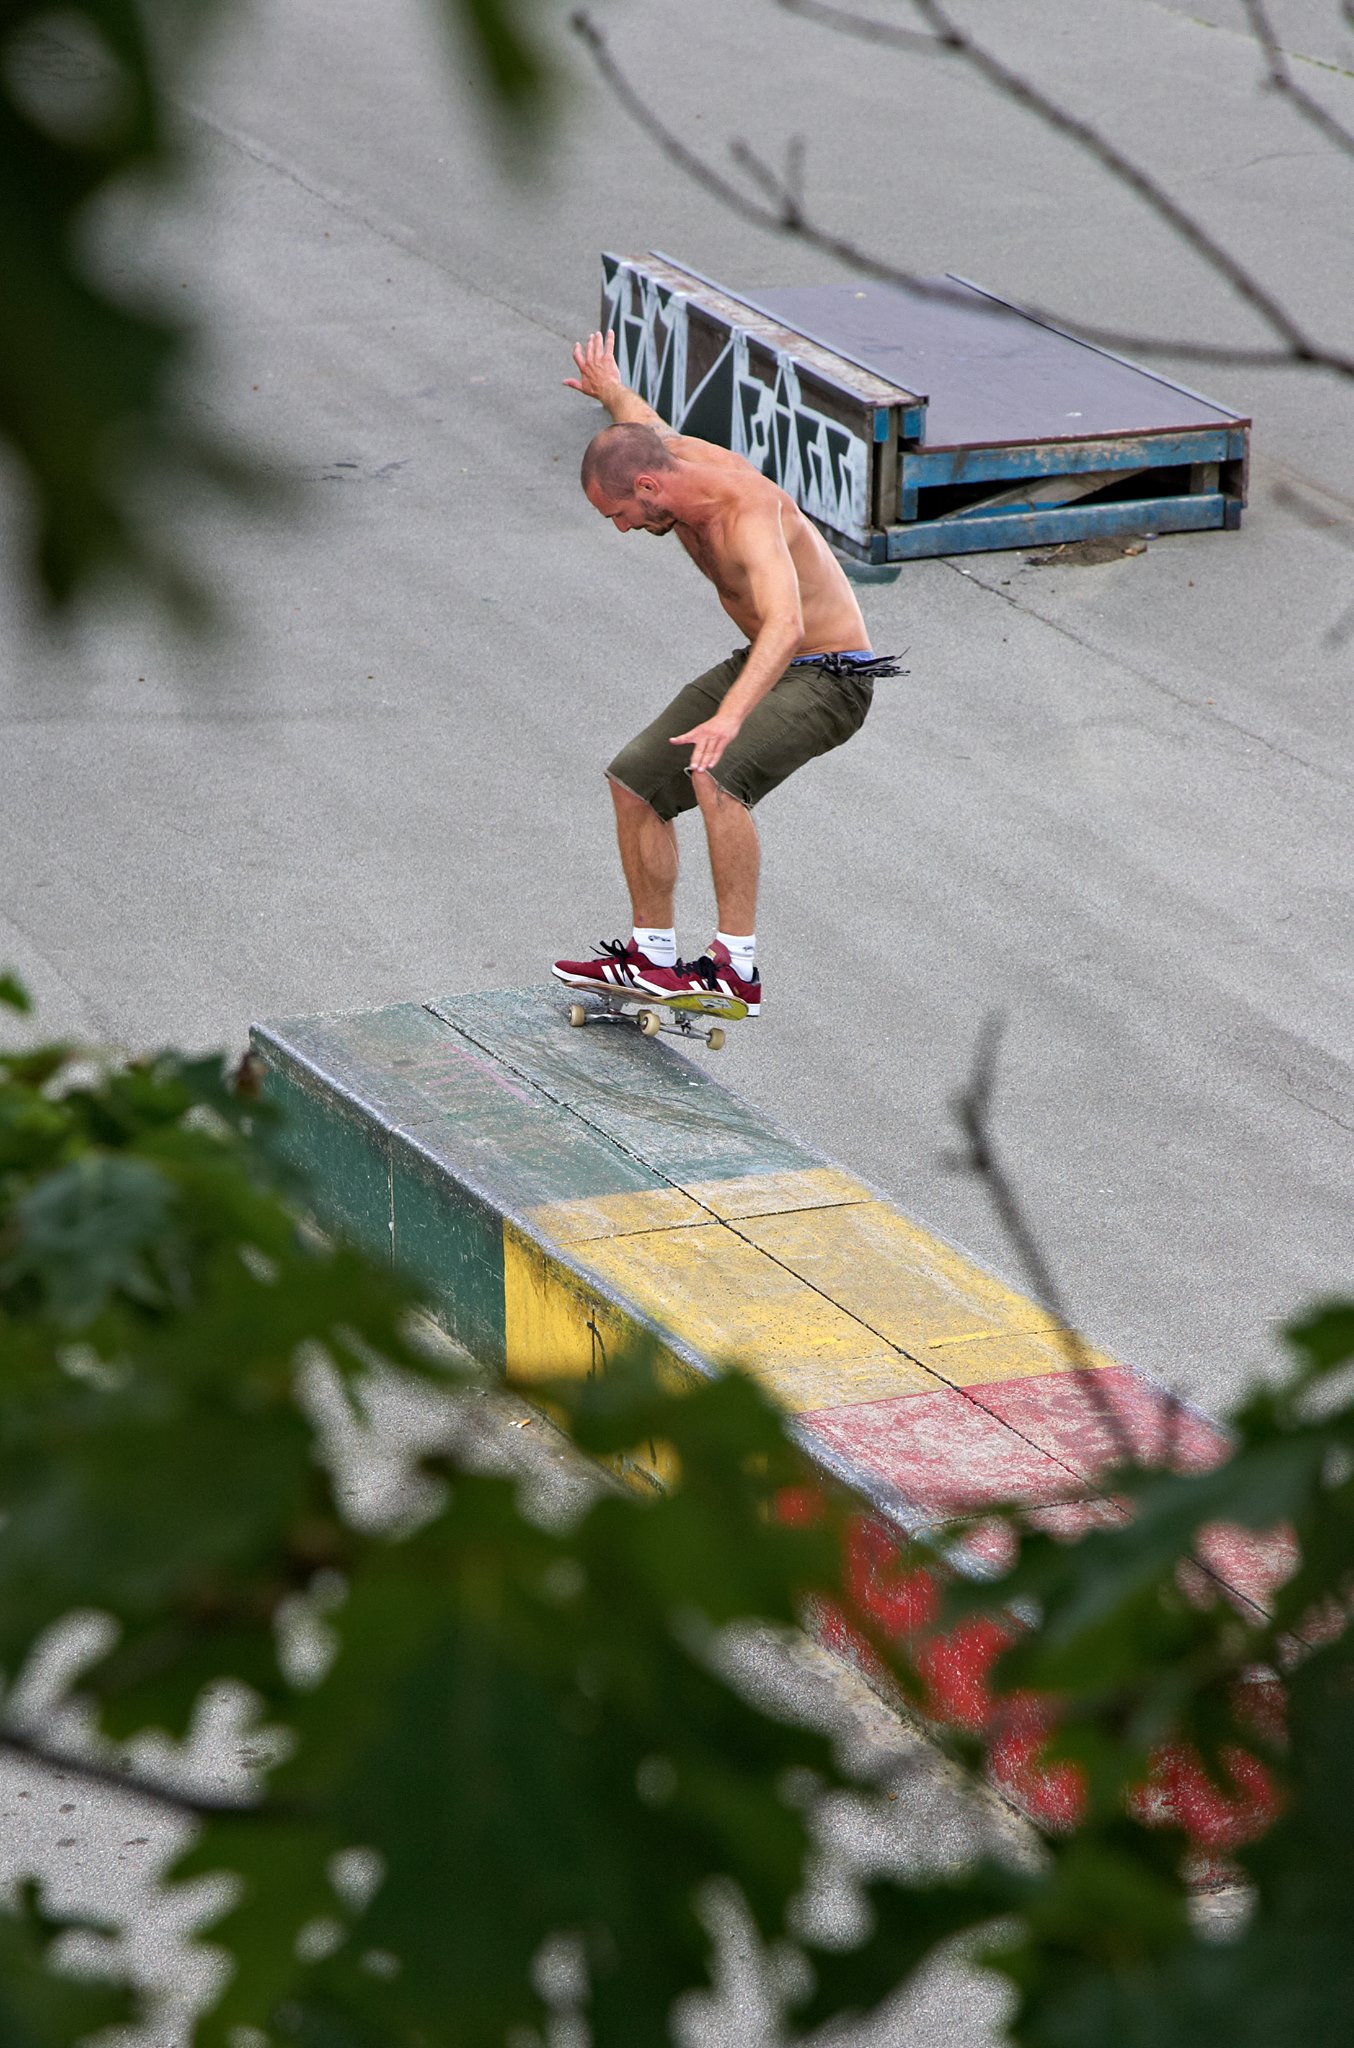 Thomas Gade, fakie five o, foto: not sure, credit coming